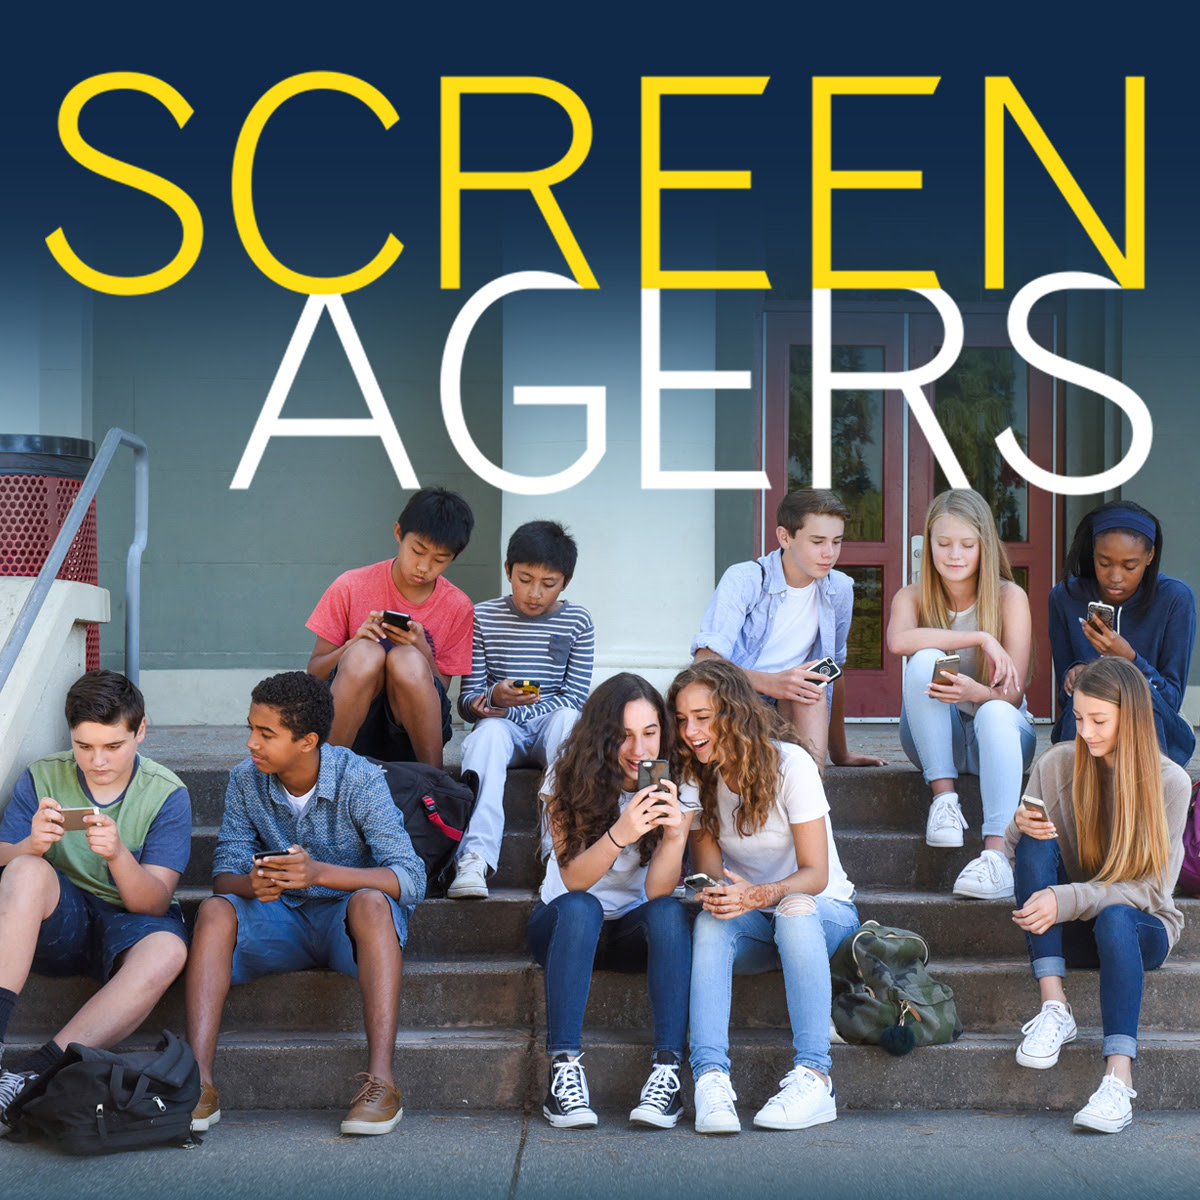 Screenagers Film Presented By Strough Middle School